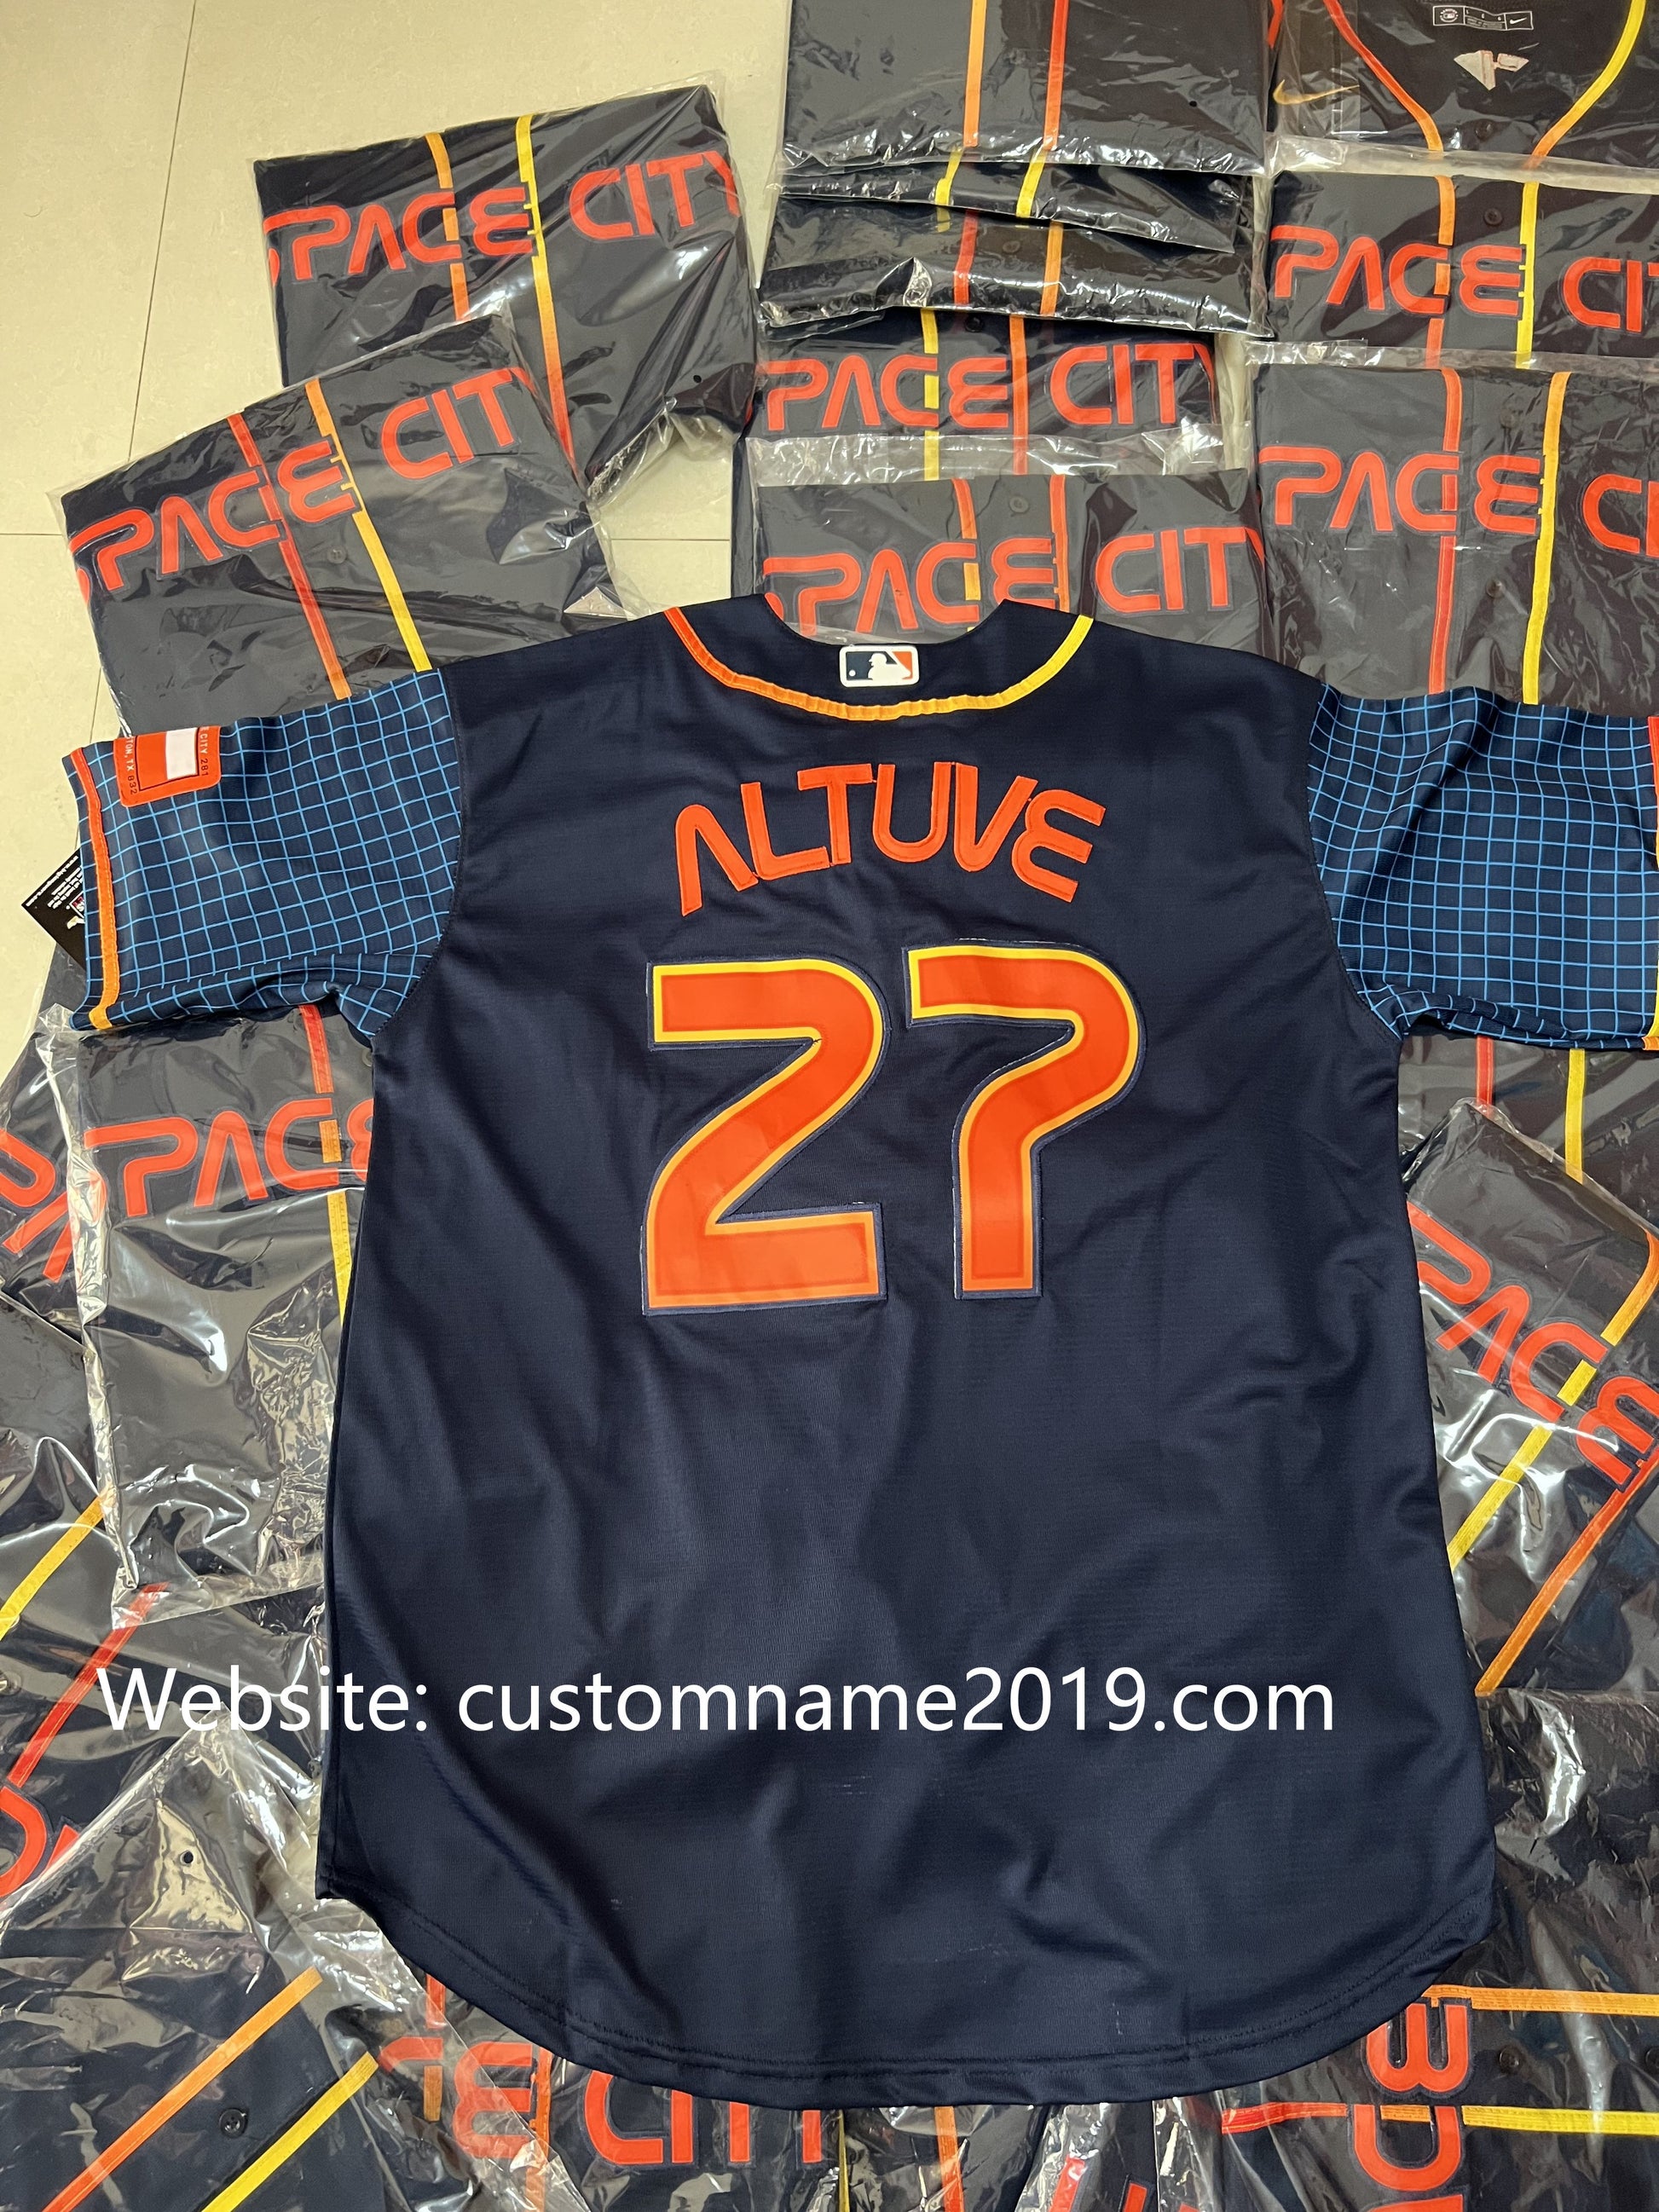 Jose Altuve - #27 - Houston Astros Space City Connect Baseball Jersey in  2023